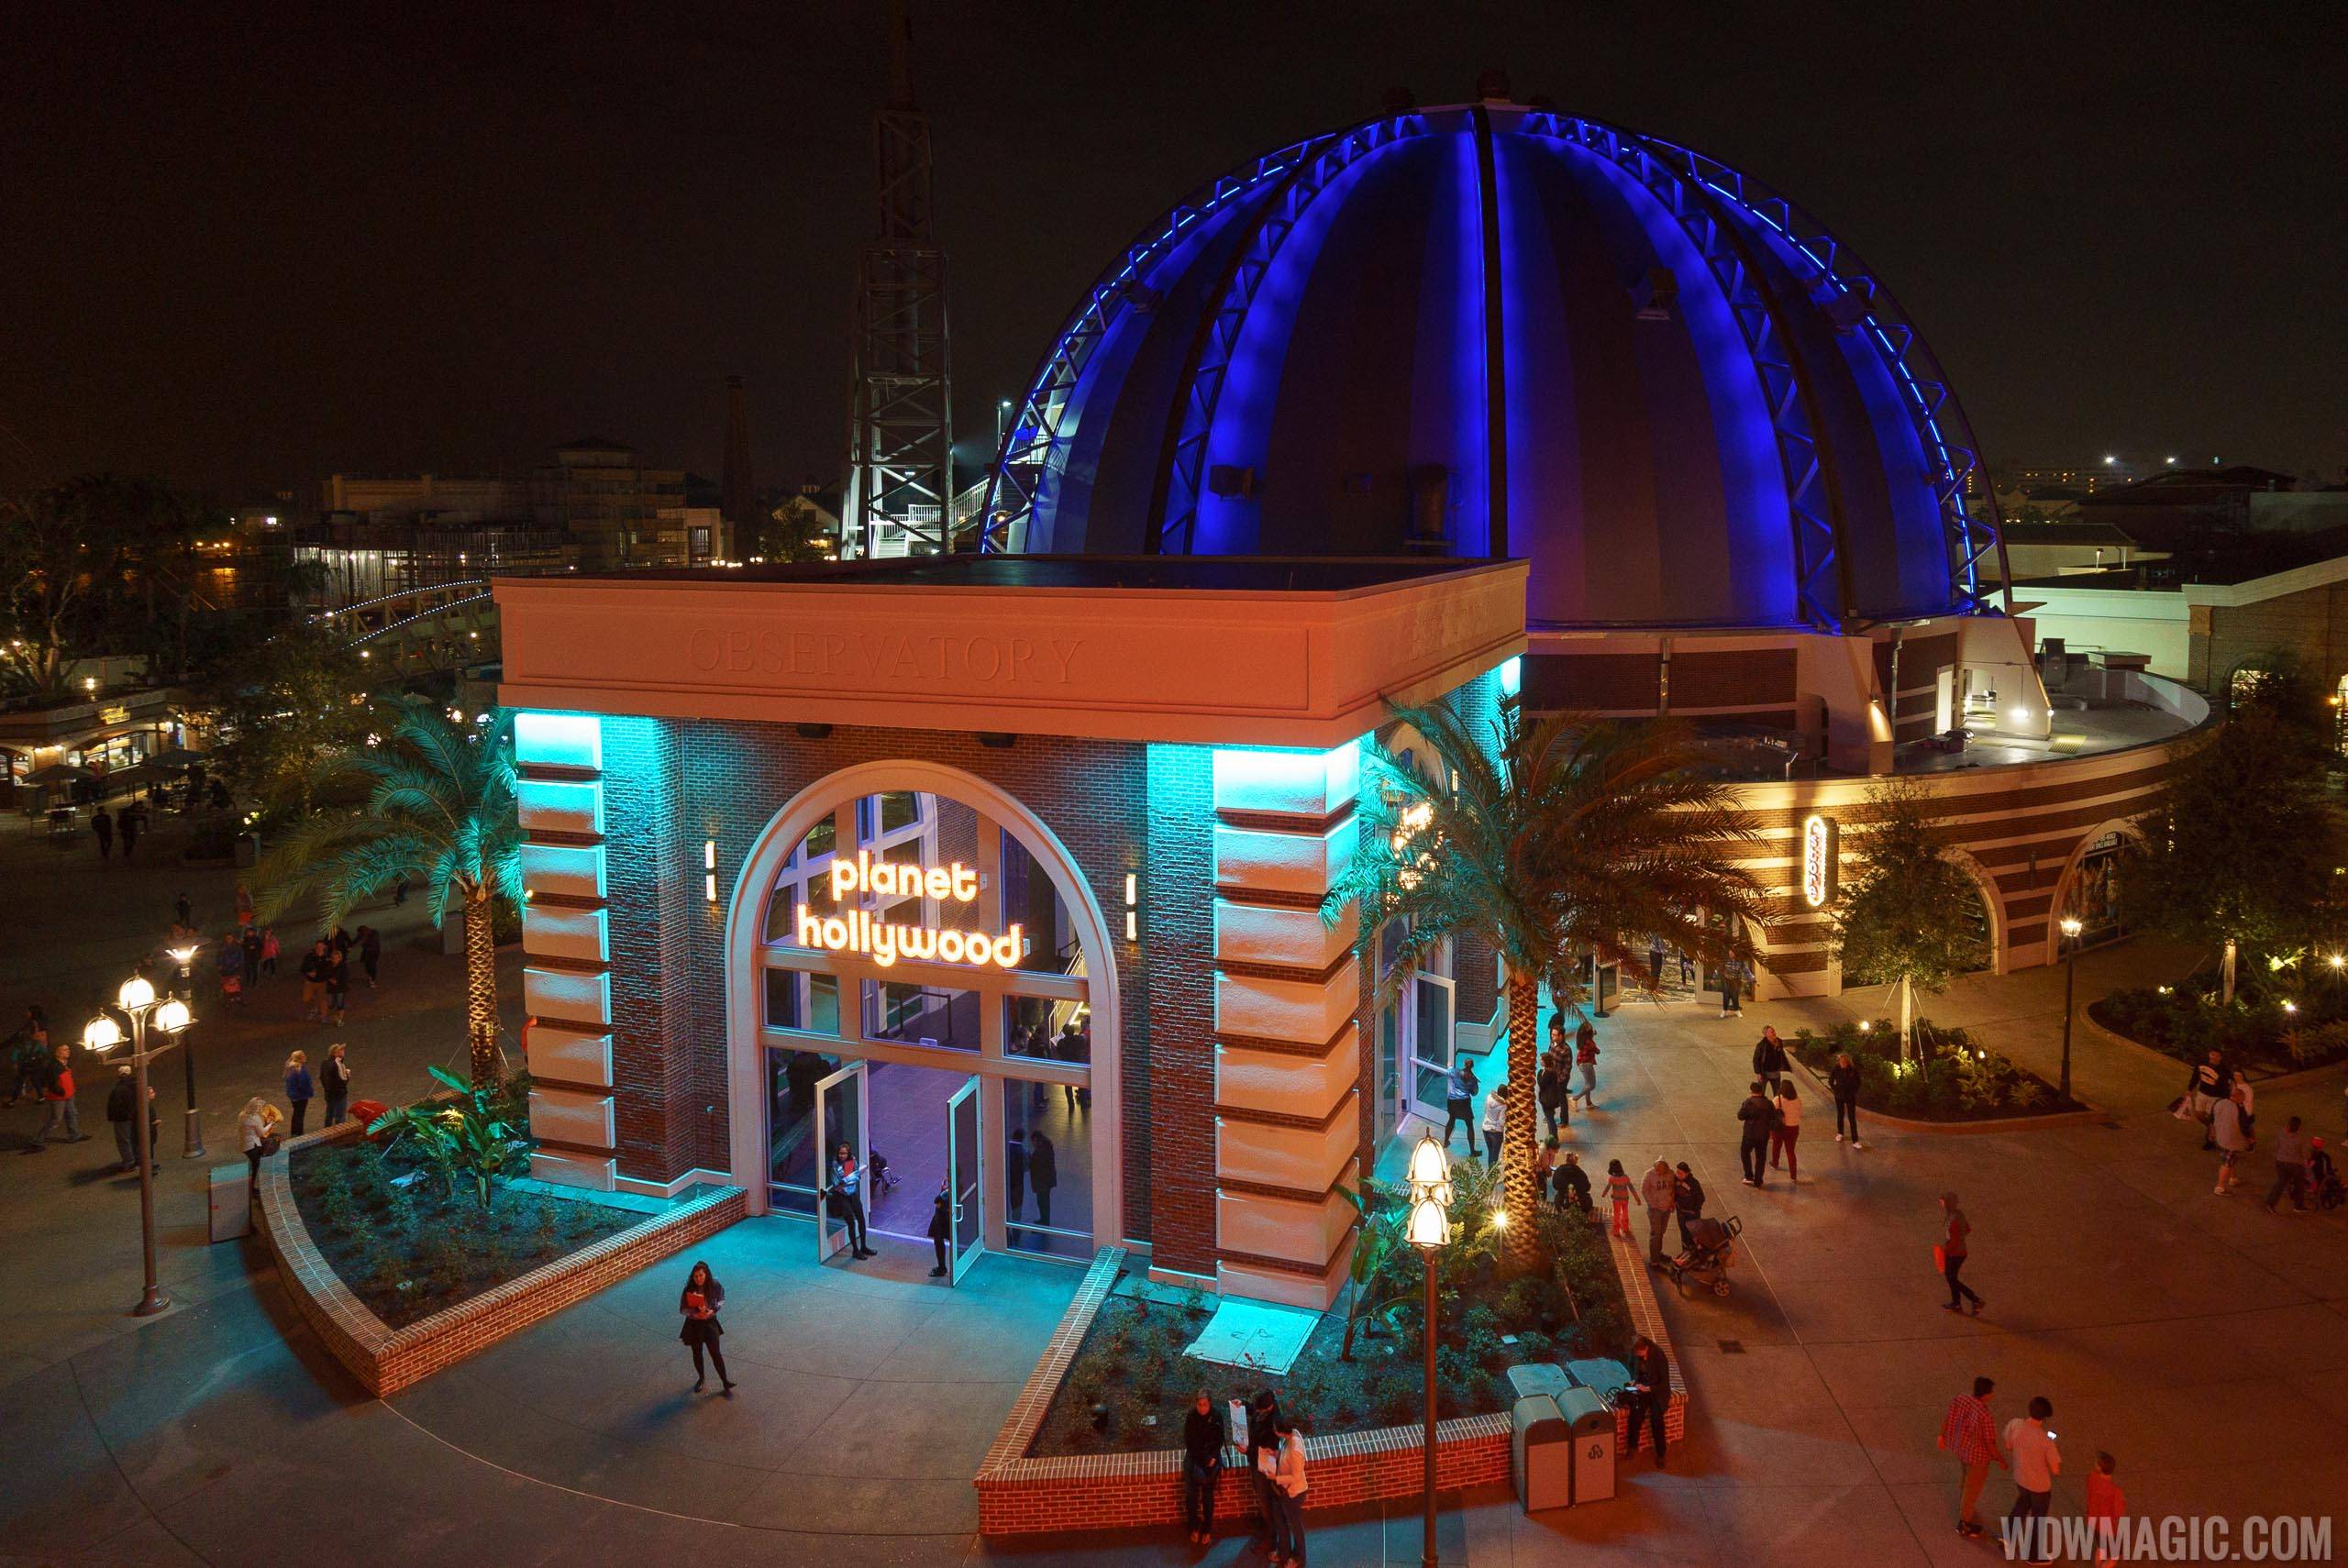 Planet Hollywood Observatory files permits for the addition of a quick service restaurant